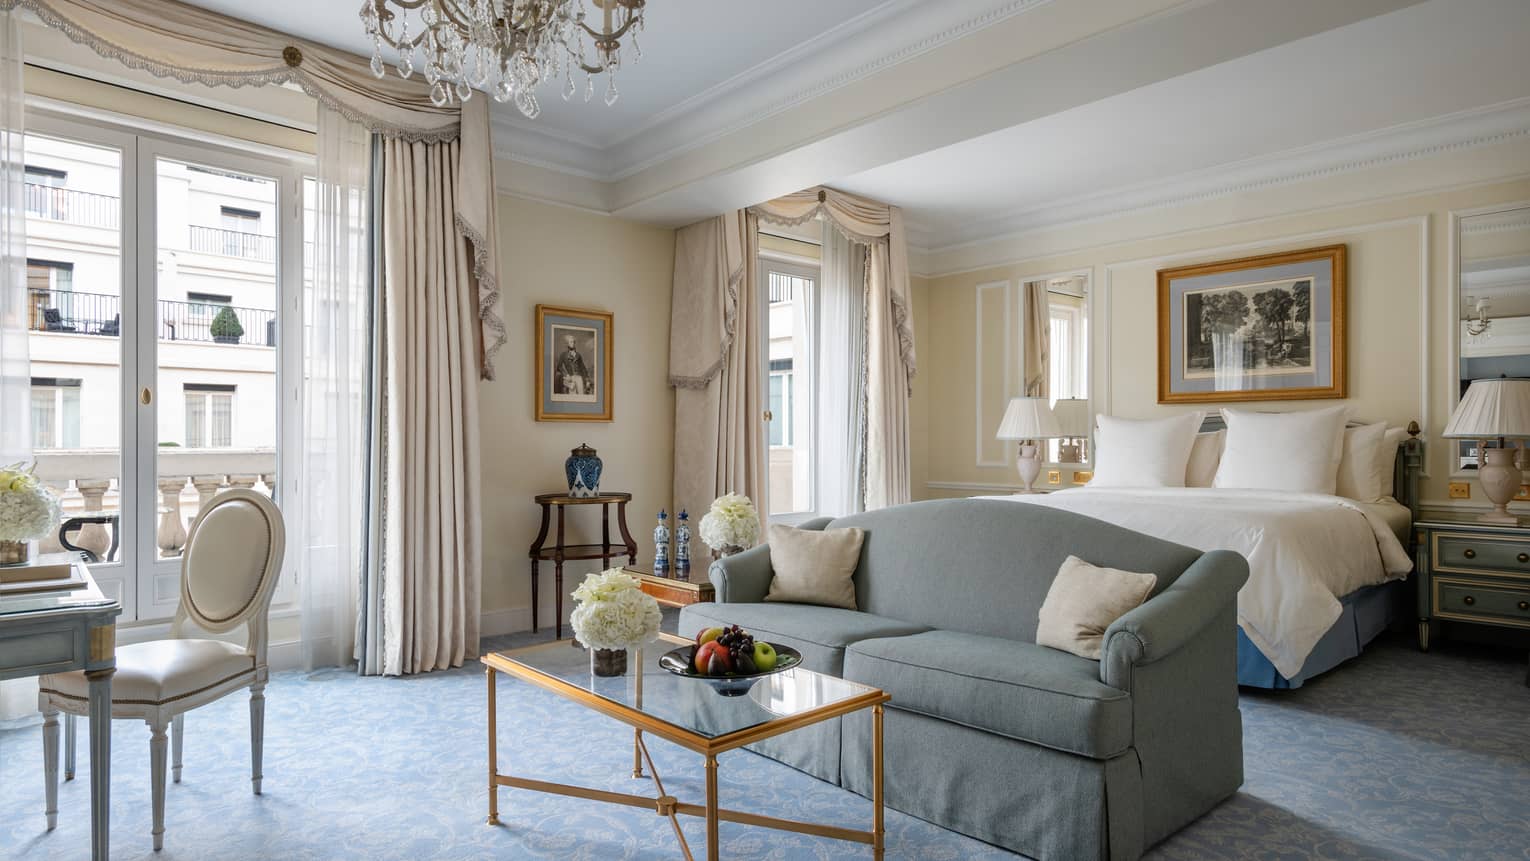 Premier room with queen bed, couch, coffee table, cream & teal Victorian accents, natural light 